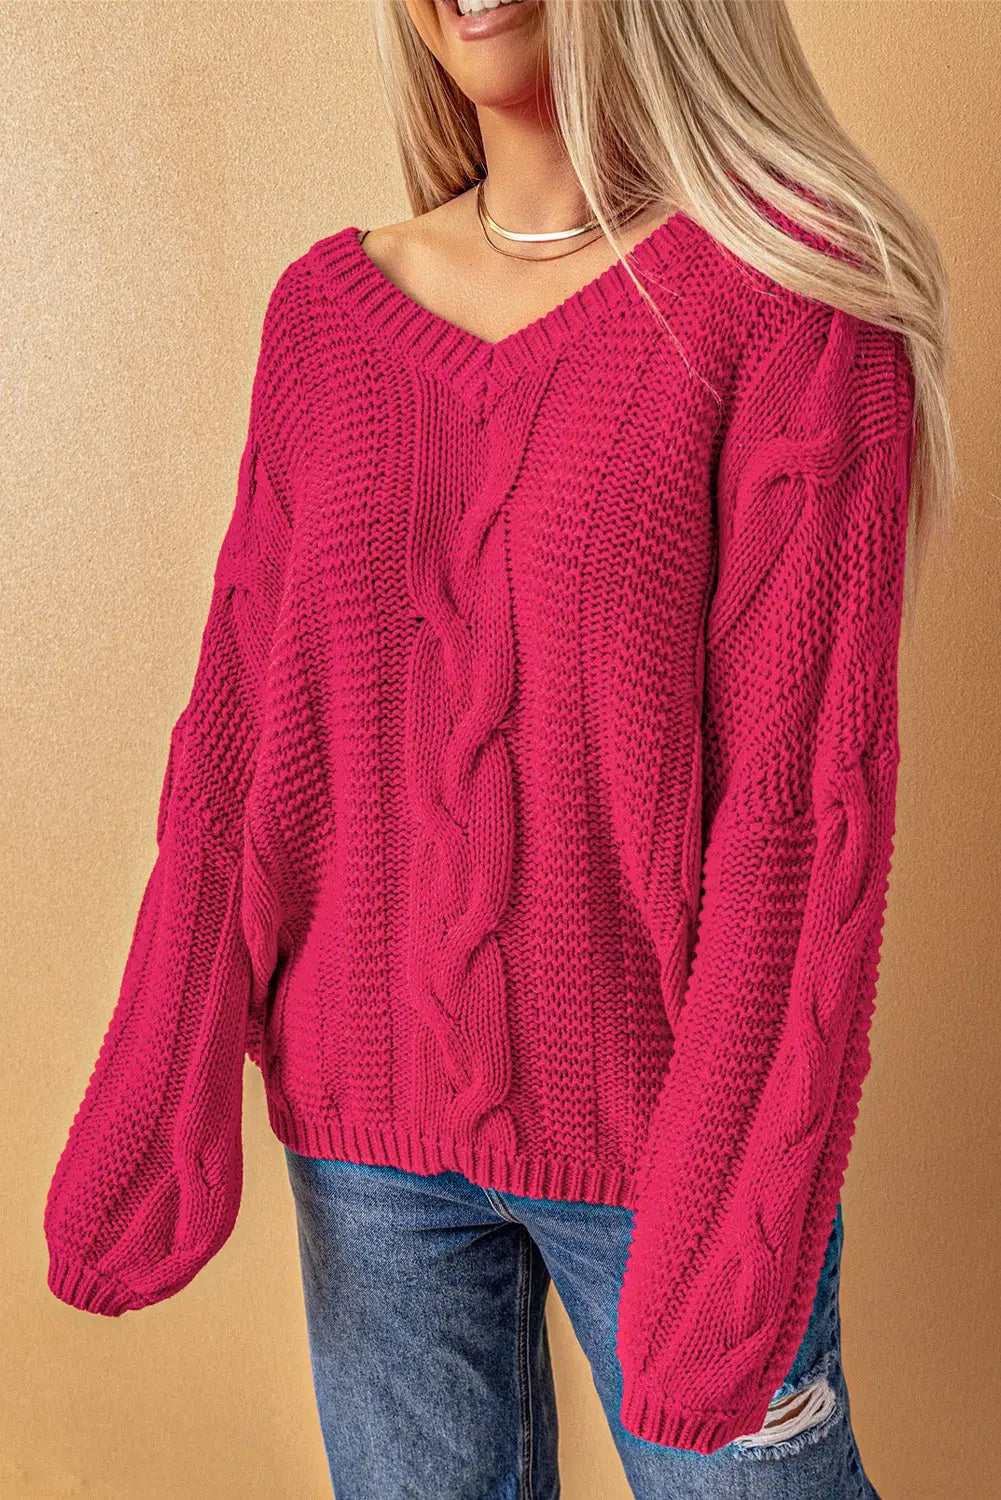 Green bubblegum v-neck braided knit sweater - rose / s / 60% cotton + 40% acrylic - sweaters & cardigans